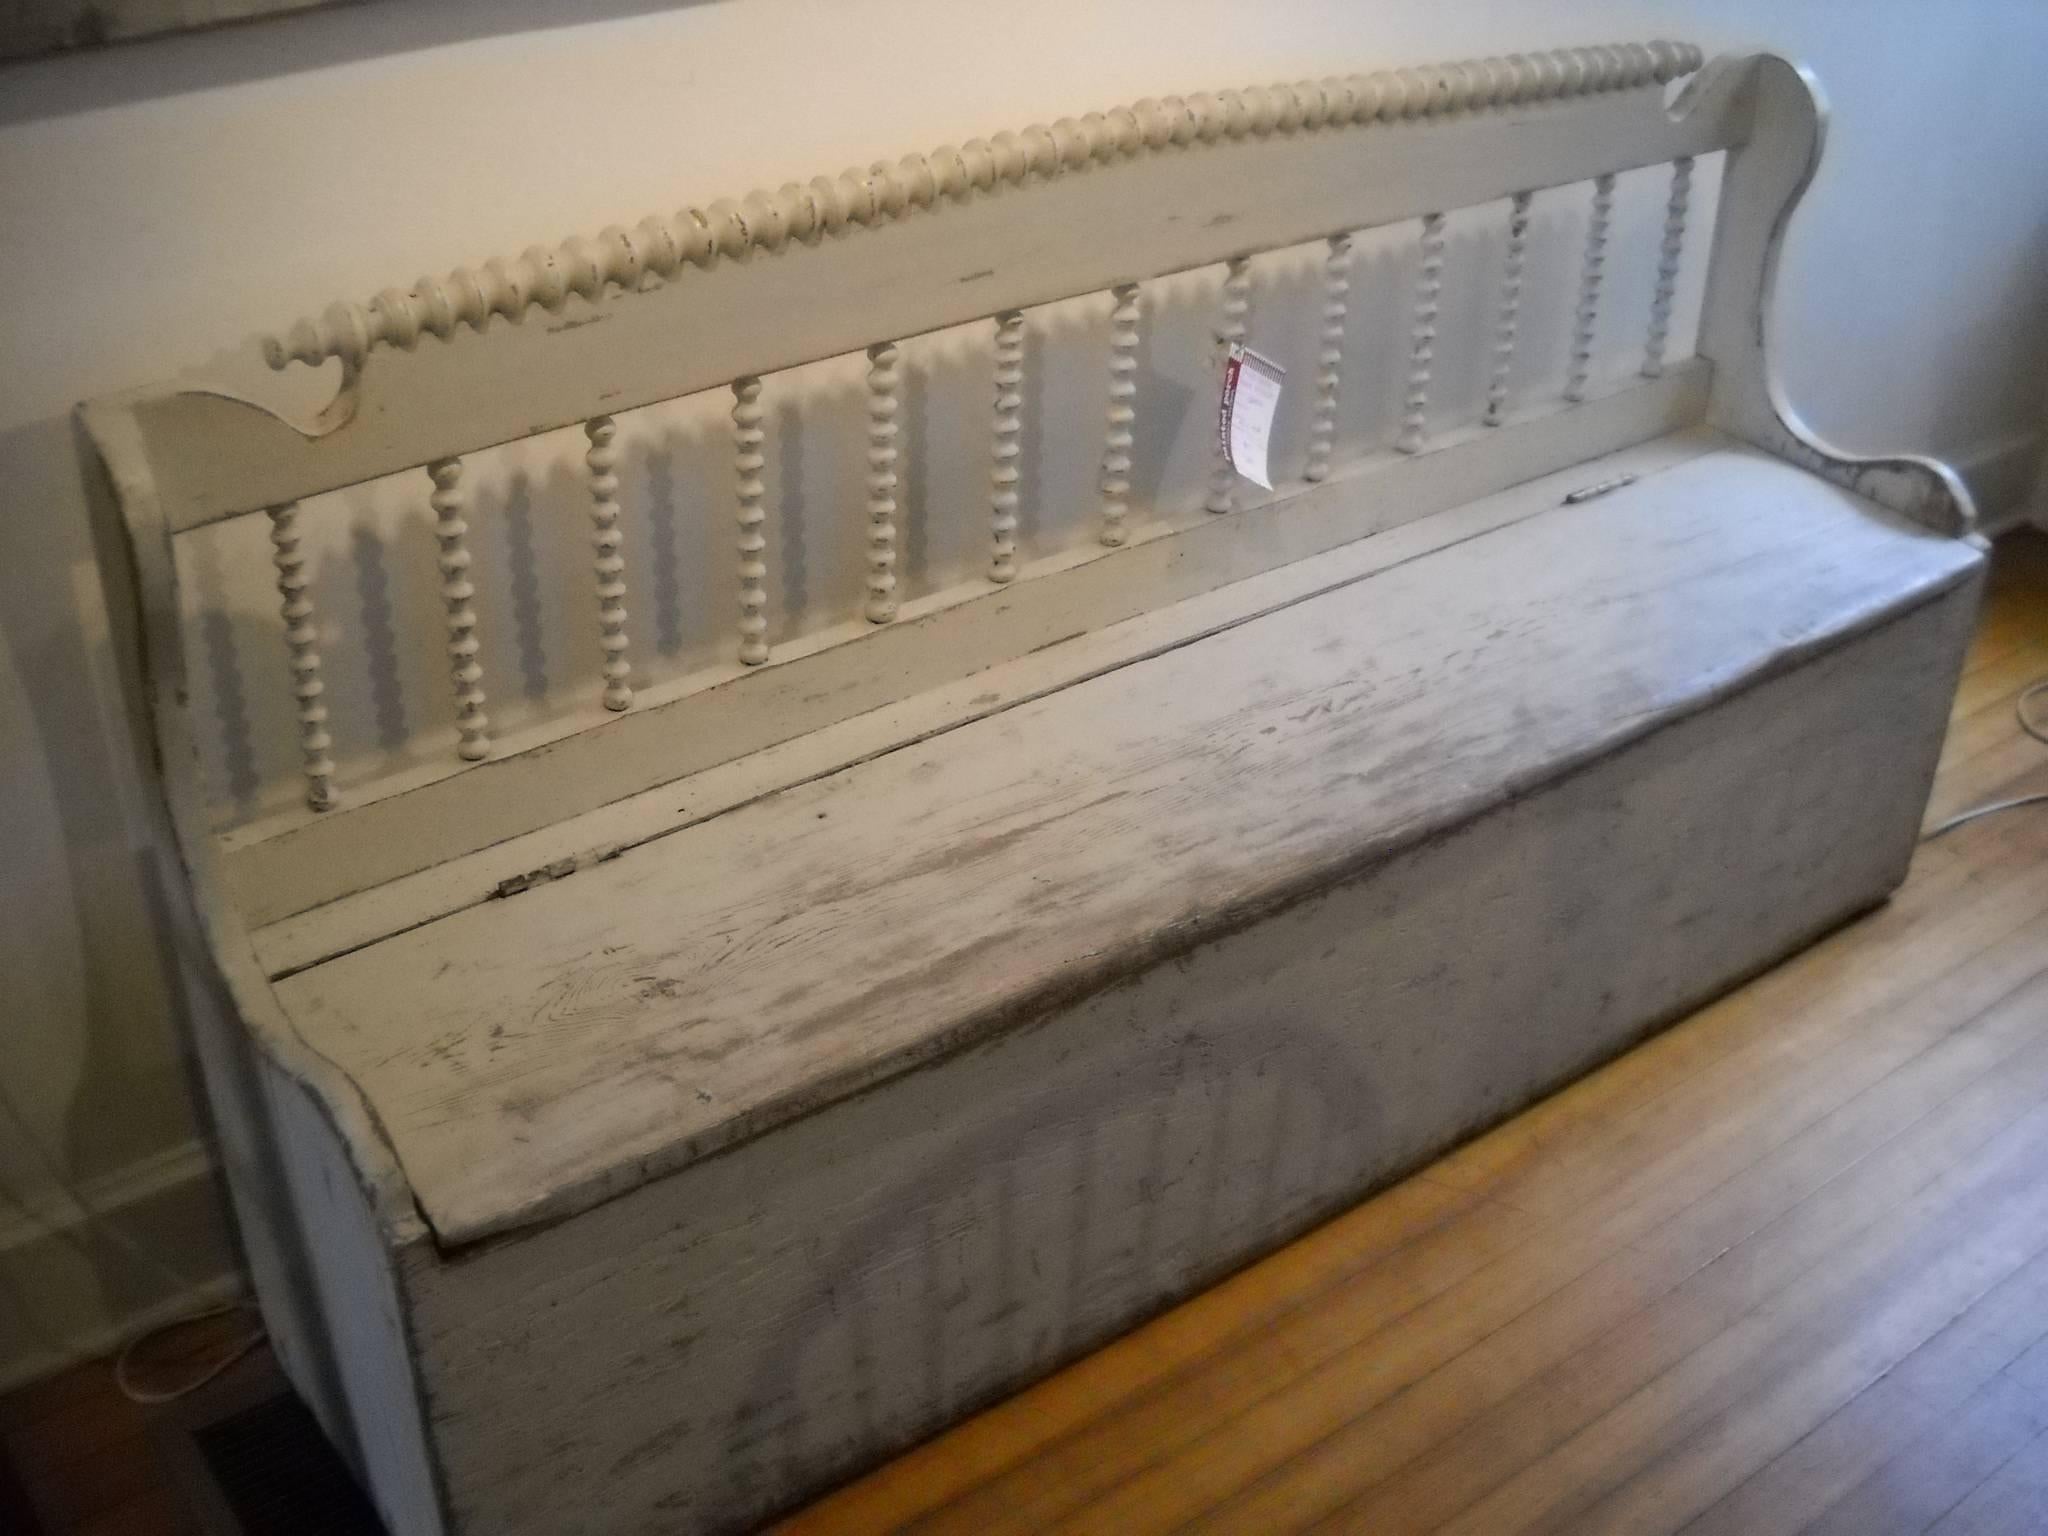 This gorgeous off-white painted bench is defined by many traits. The spindles get your attention first and it has a lift up seat with plenty of storage. The spindles across the back of the bench we have never seen before. This is a very special